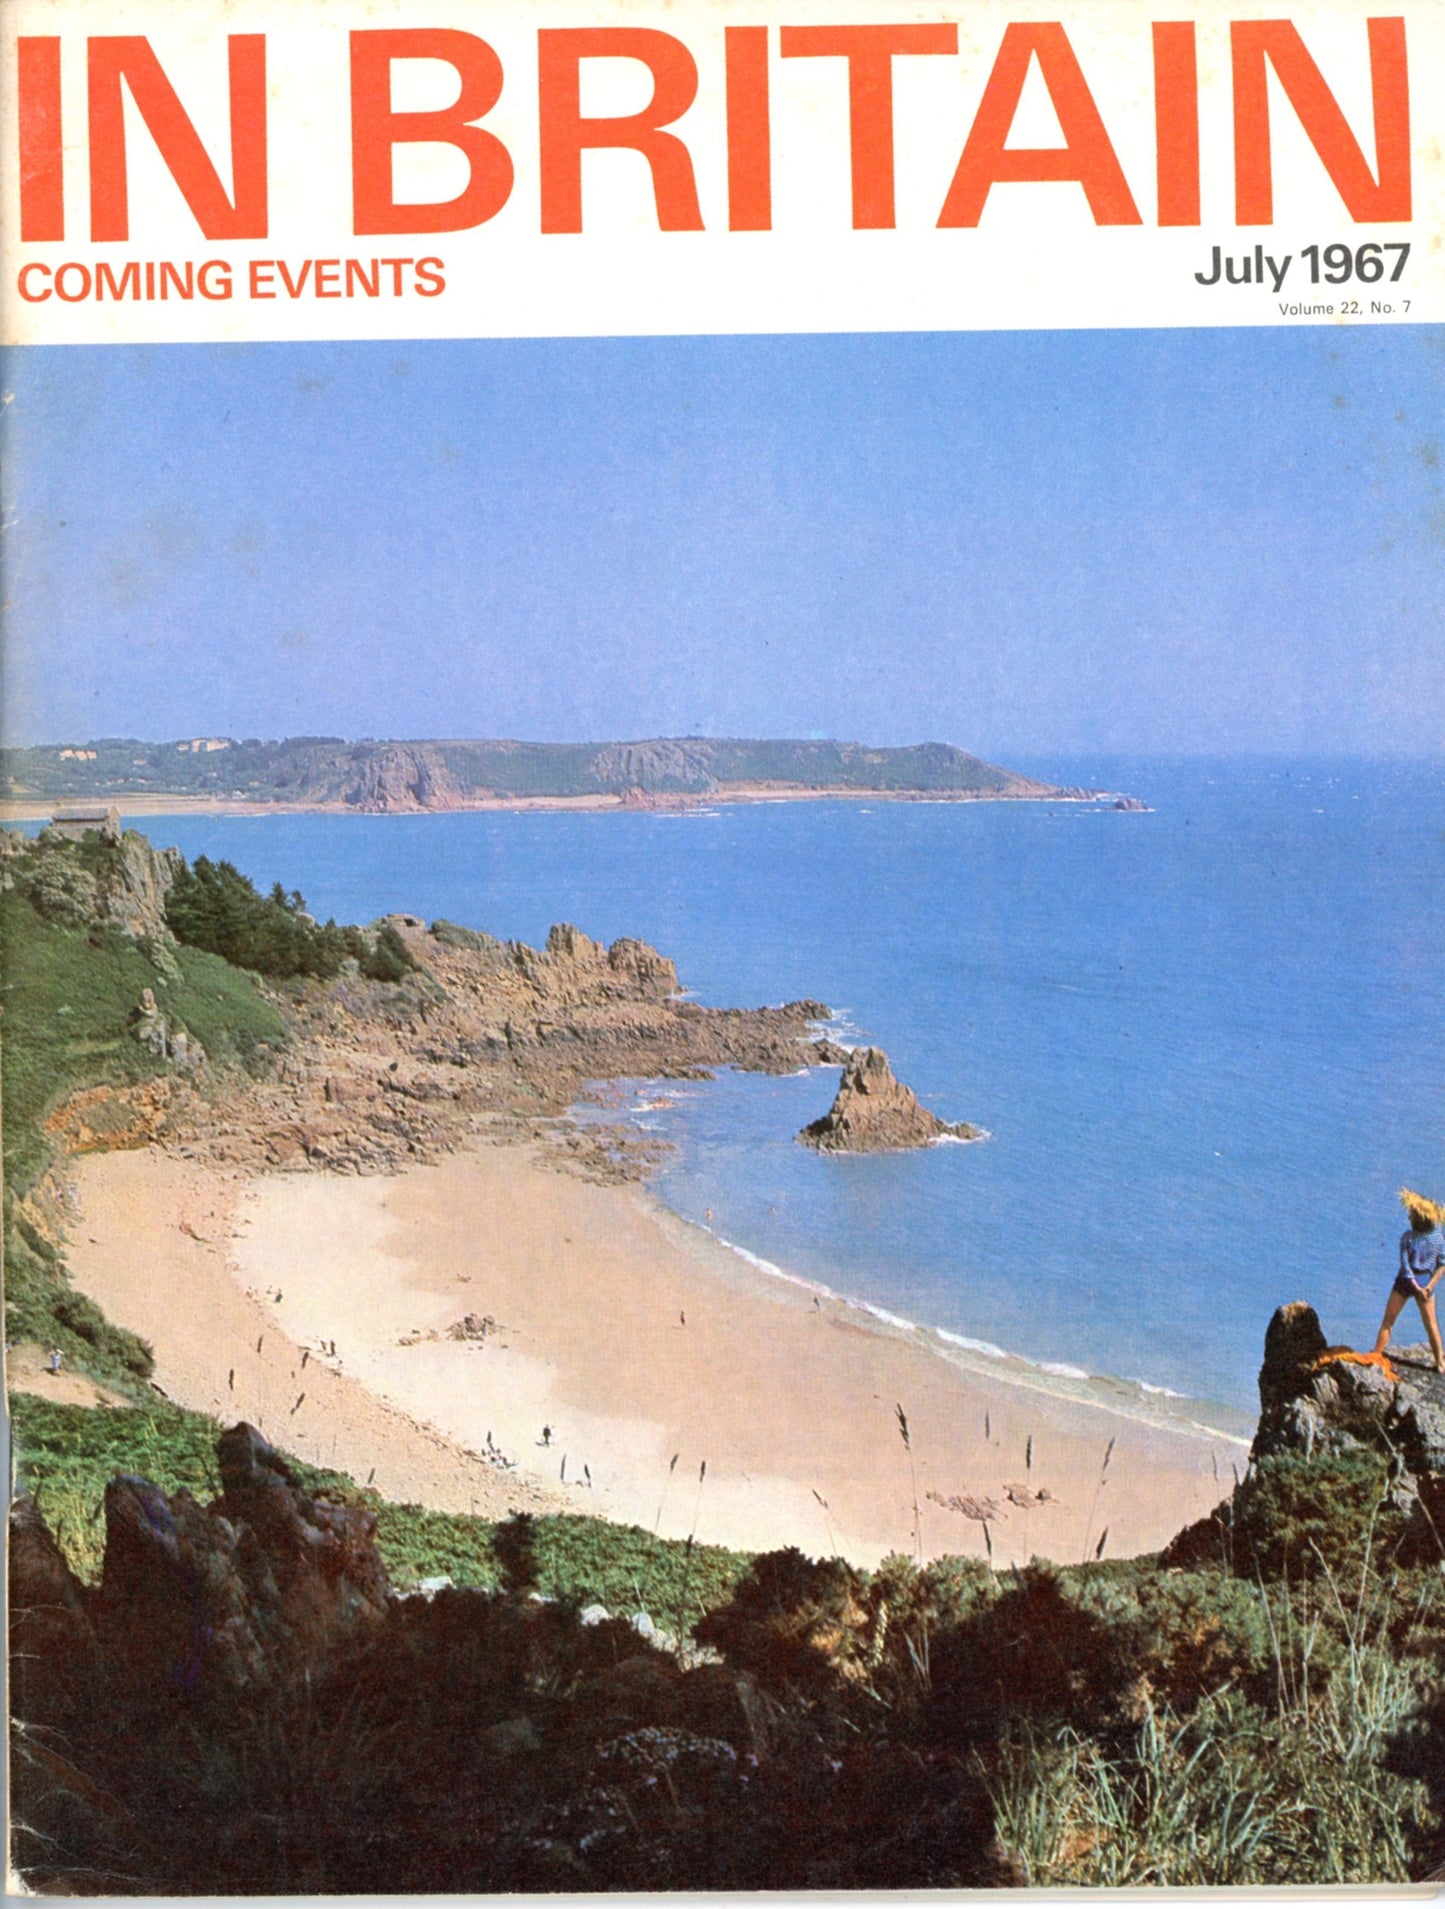 COMING EVENTS IN BRITAIN Vintage Travel Magazines Single Issues © July 1967